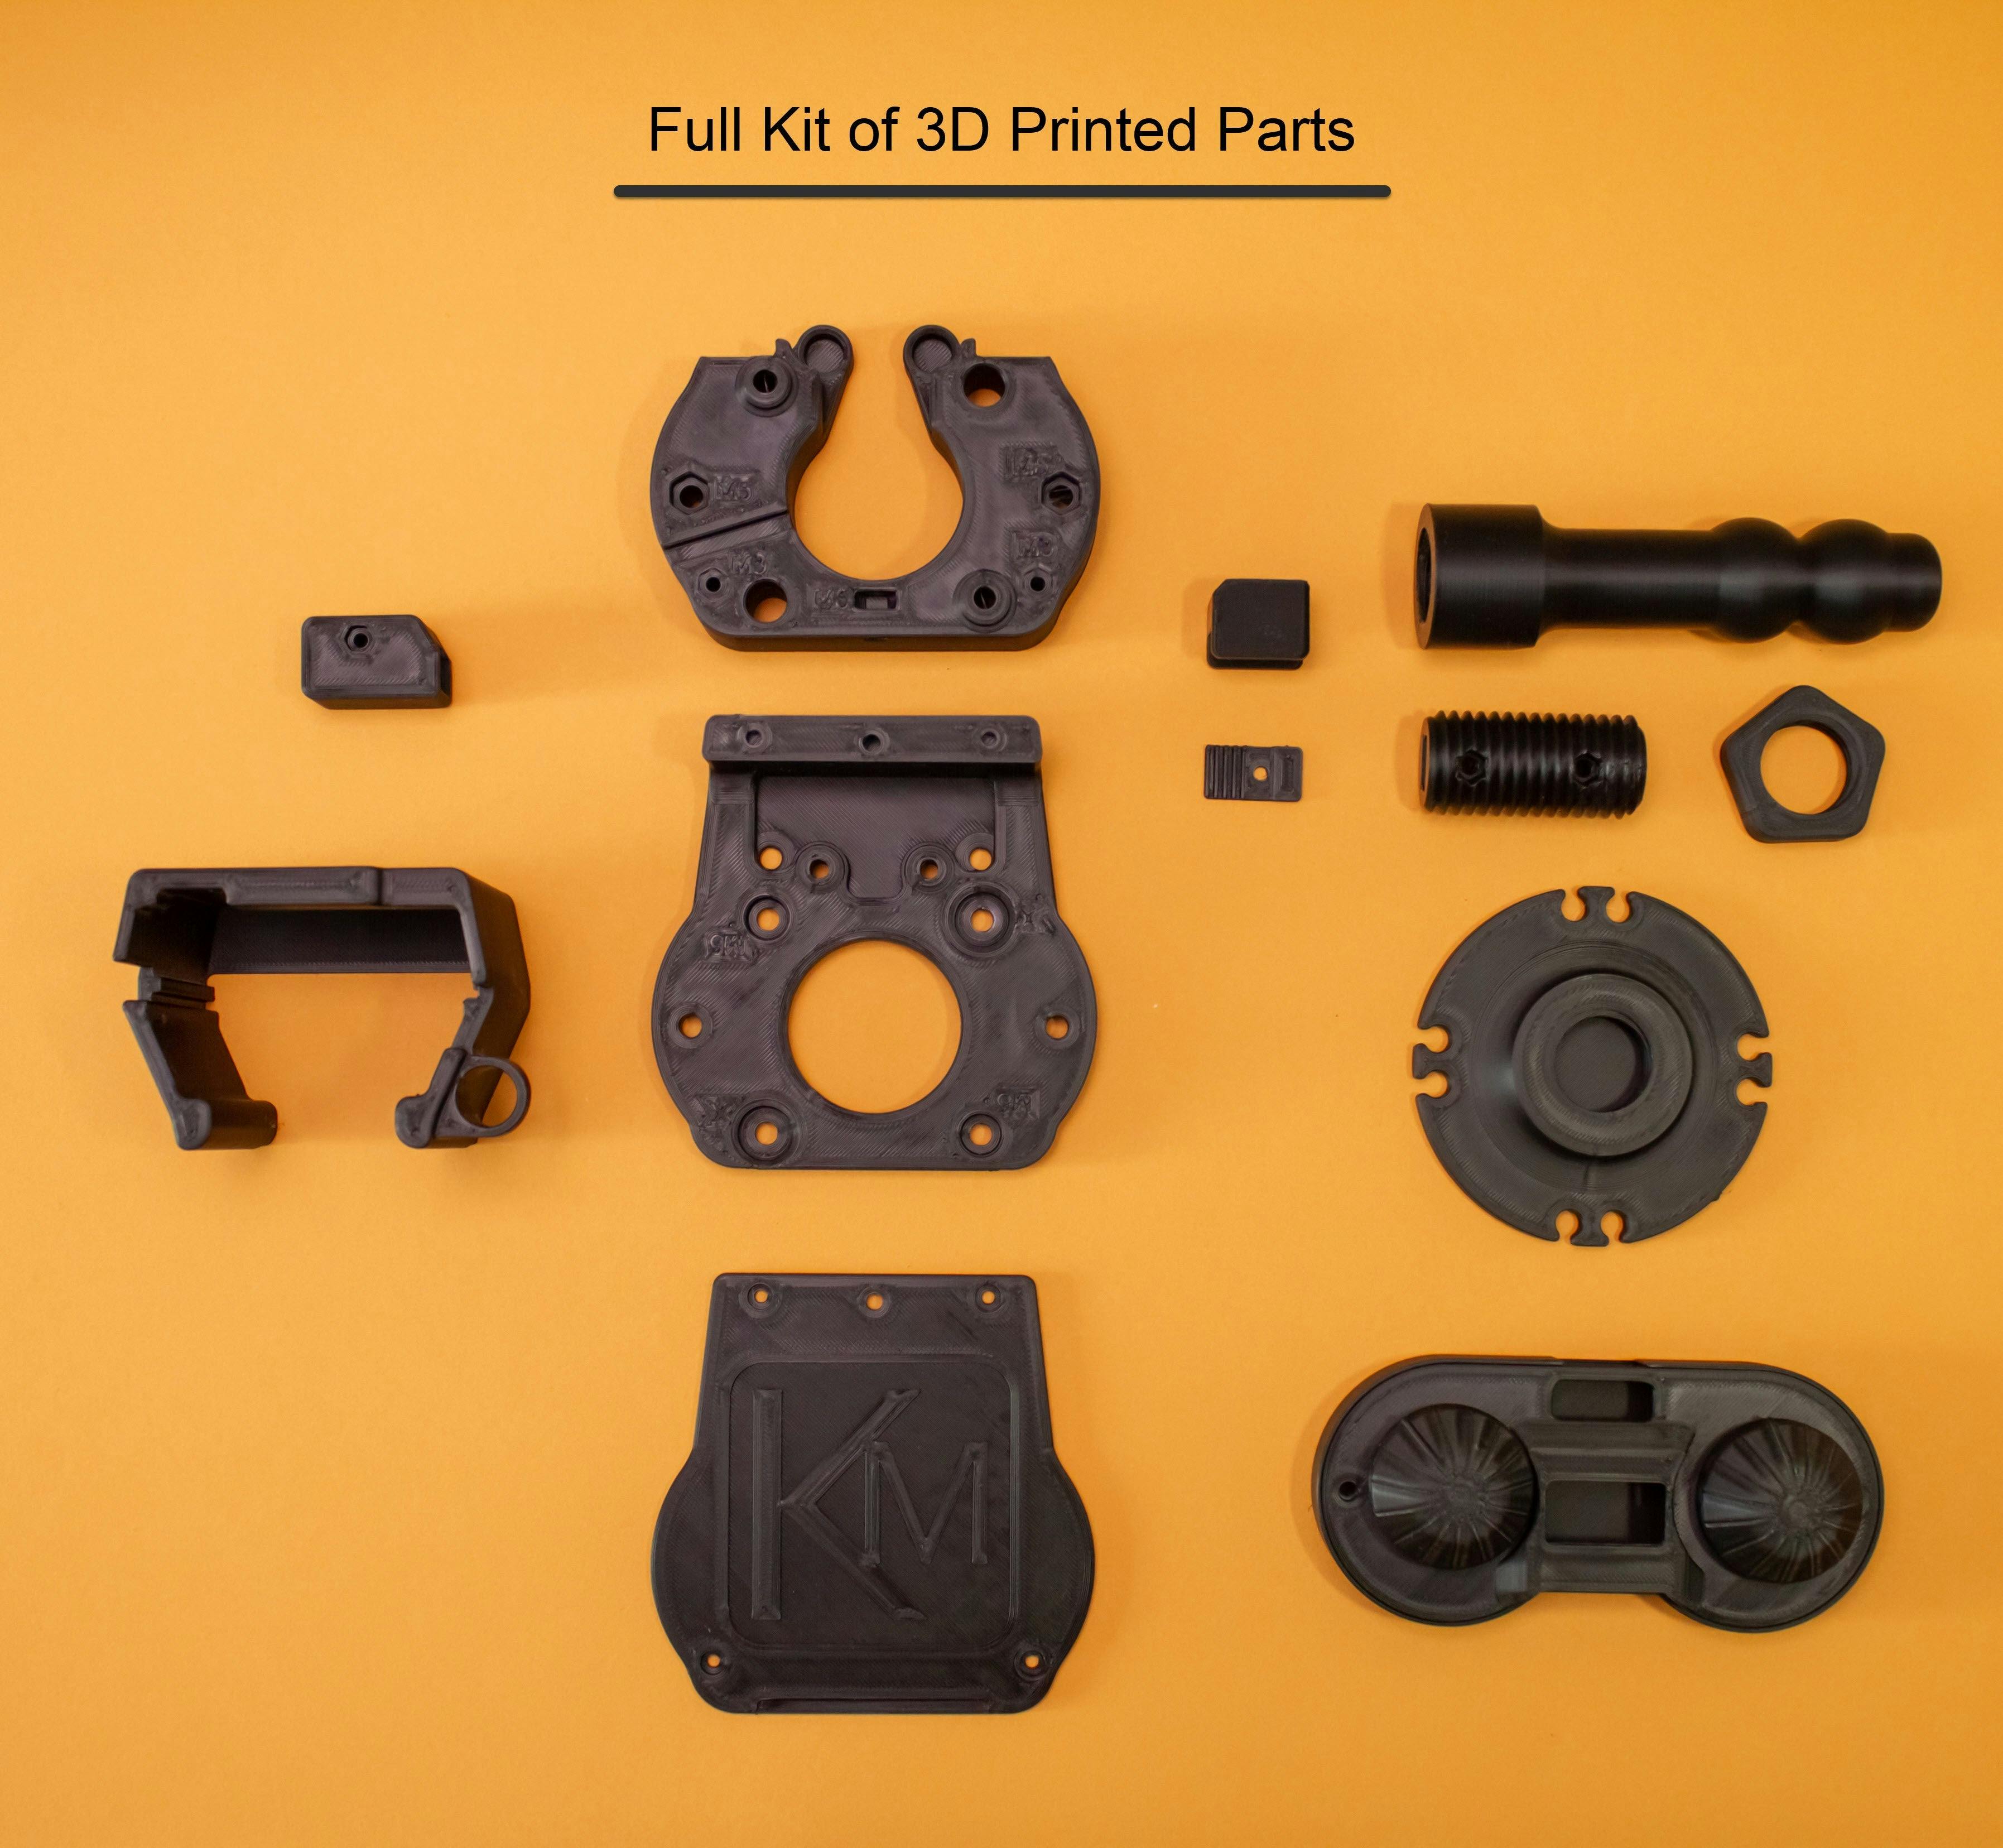 3D Printed Parts Kit for OSSM (Open Source Sex Machine) - IMG_2089_4a3f35a2-a508-46f2-803c-e52135a8c889